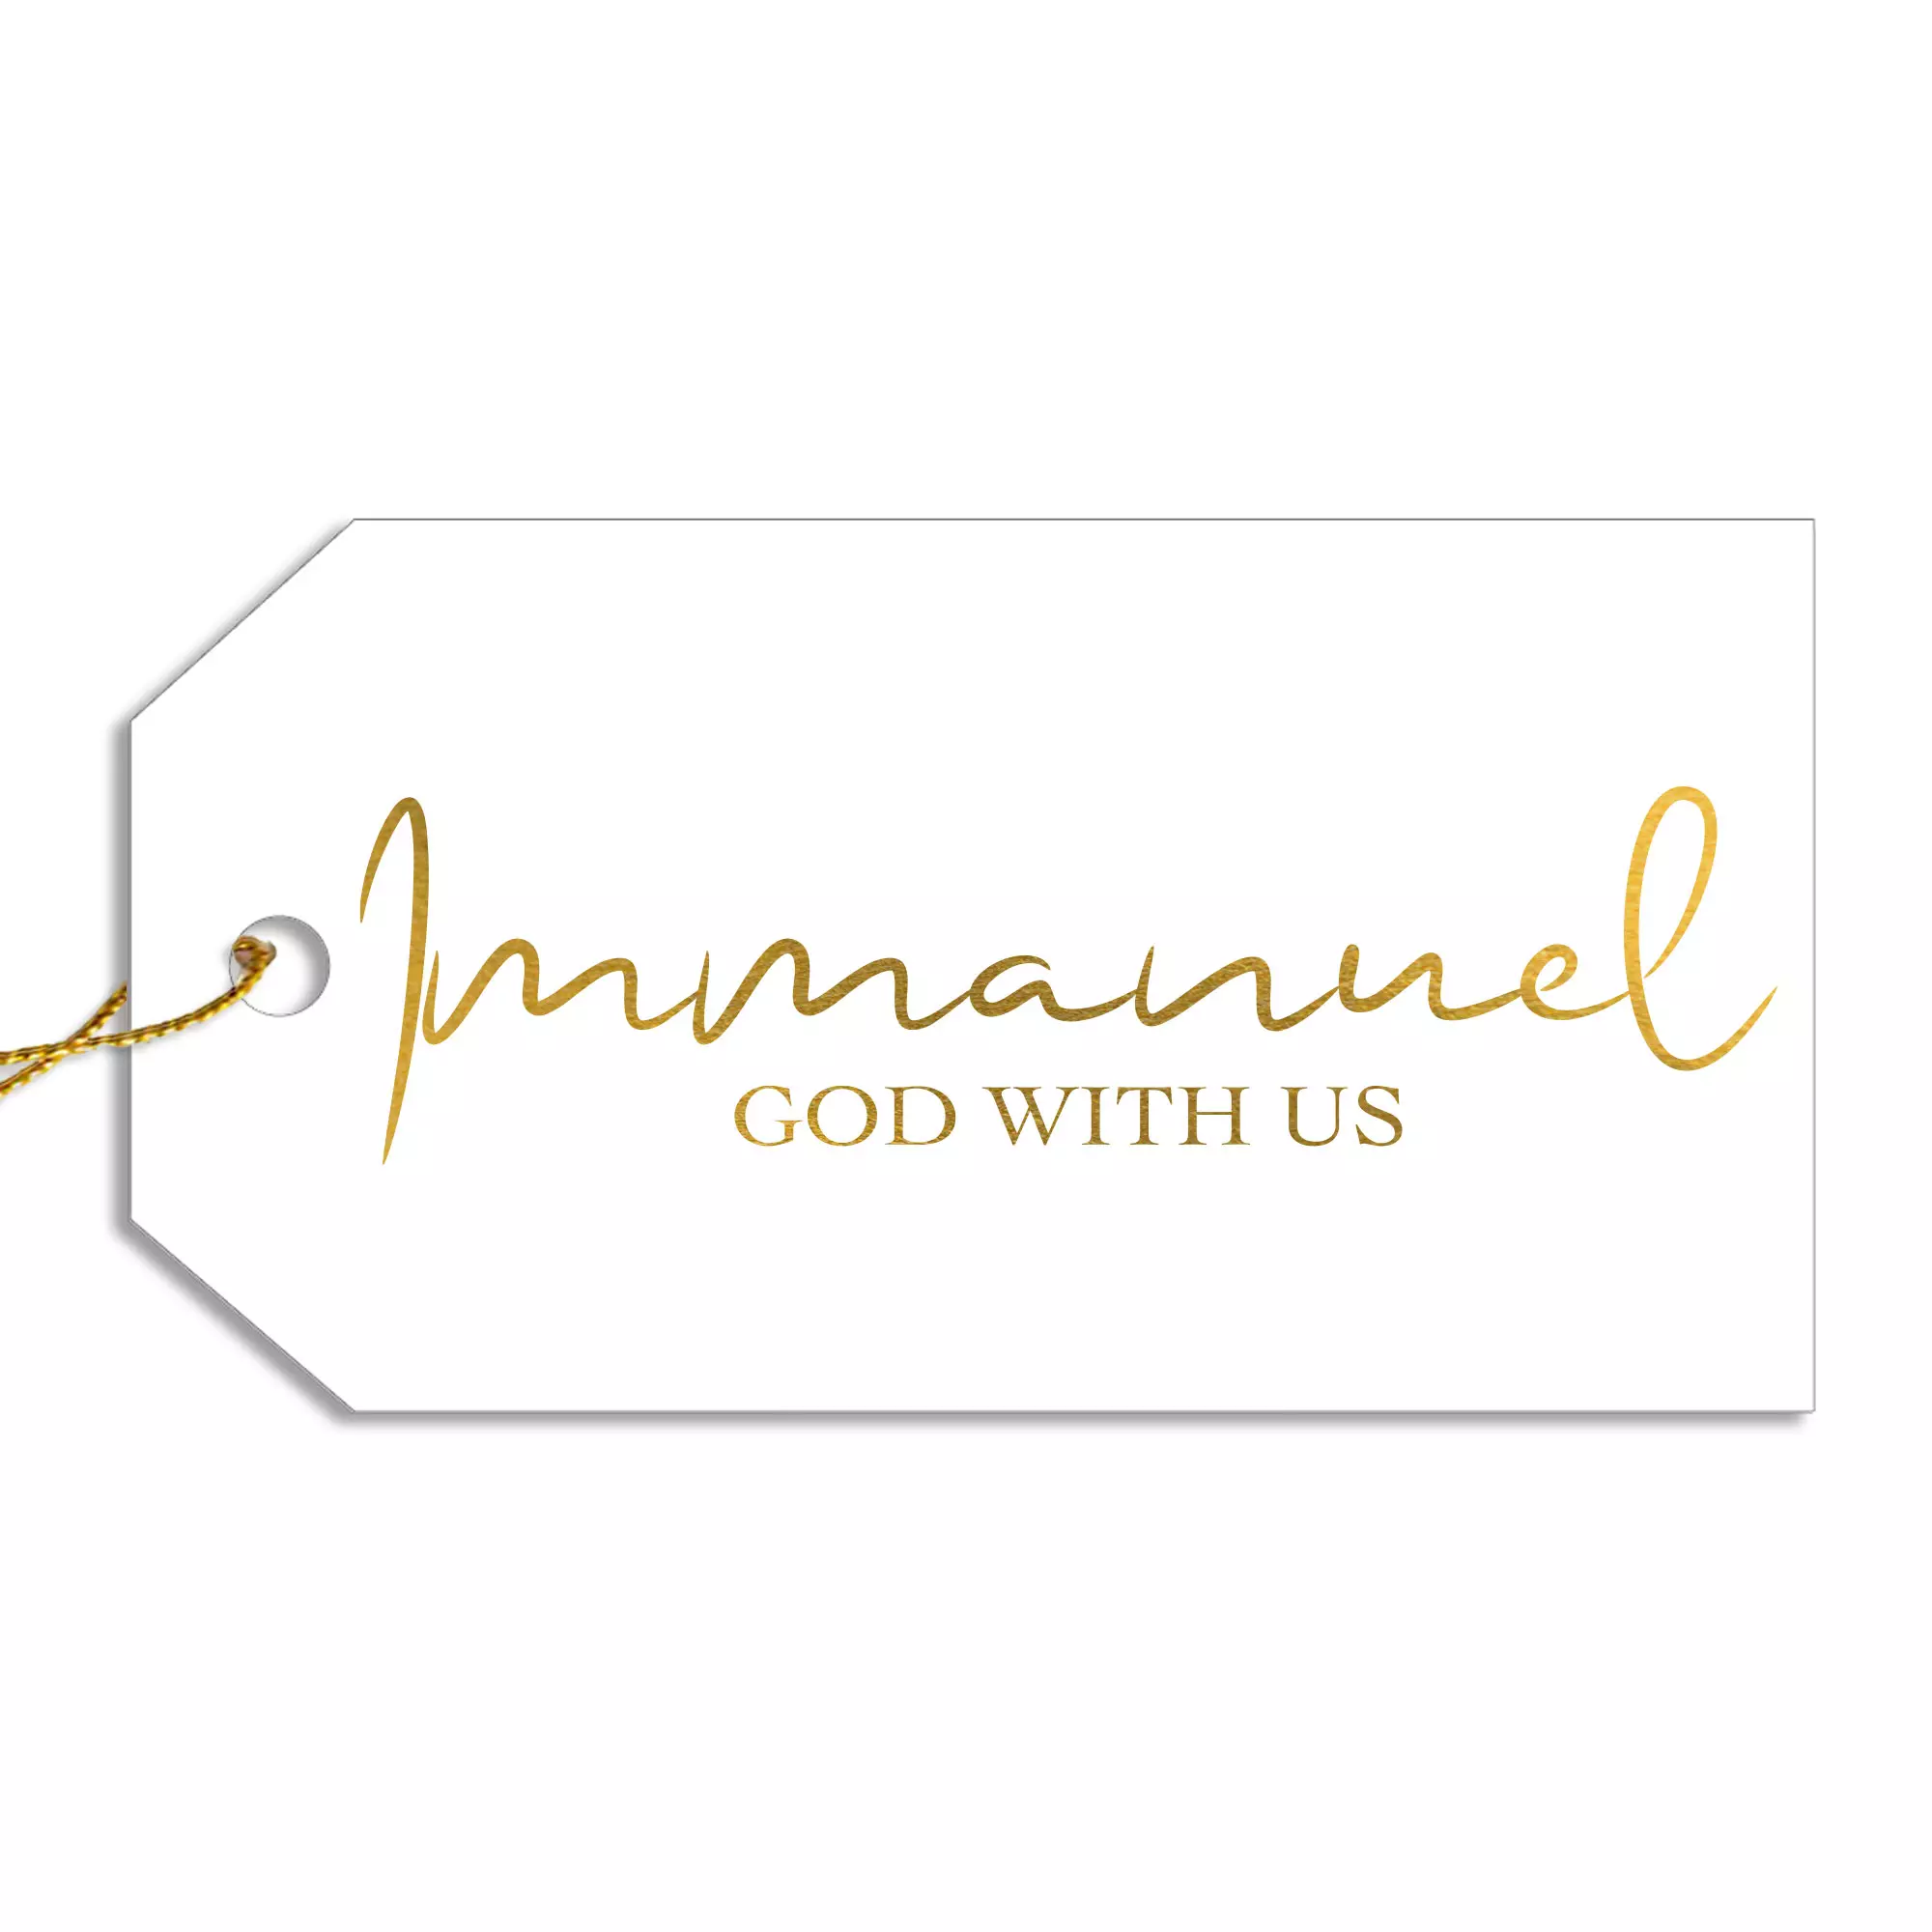 Immanuel Gift tags